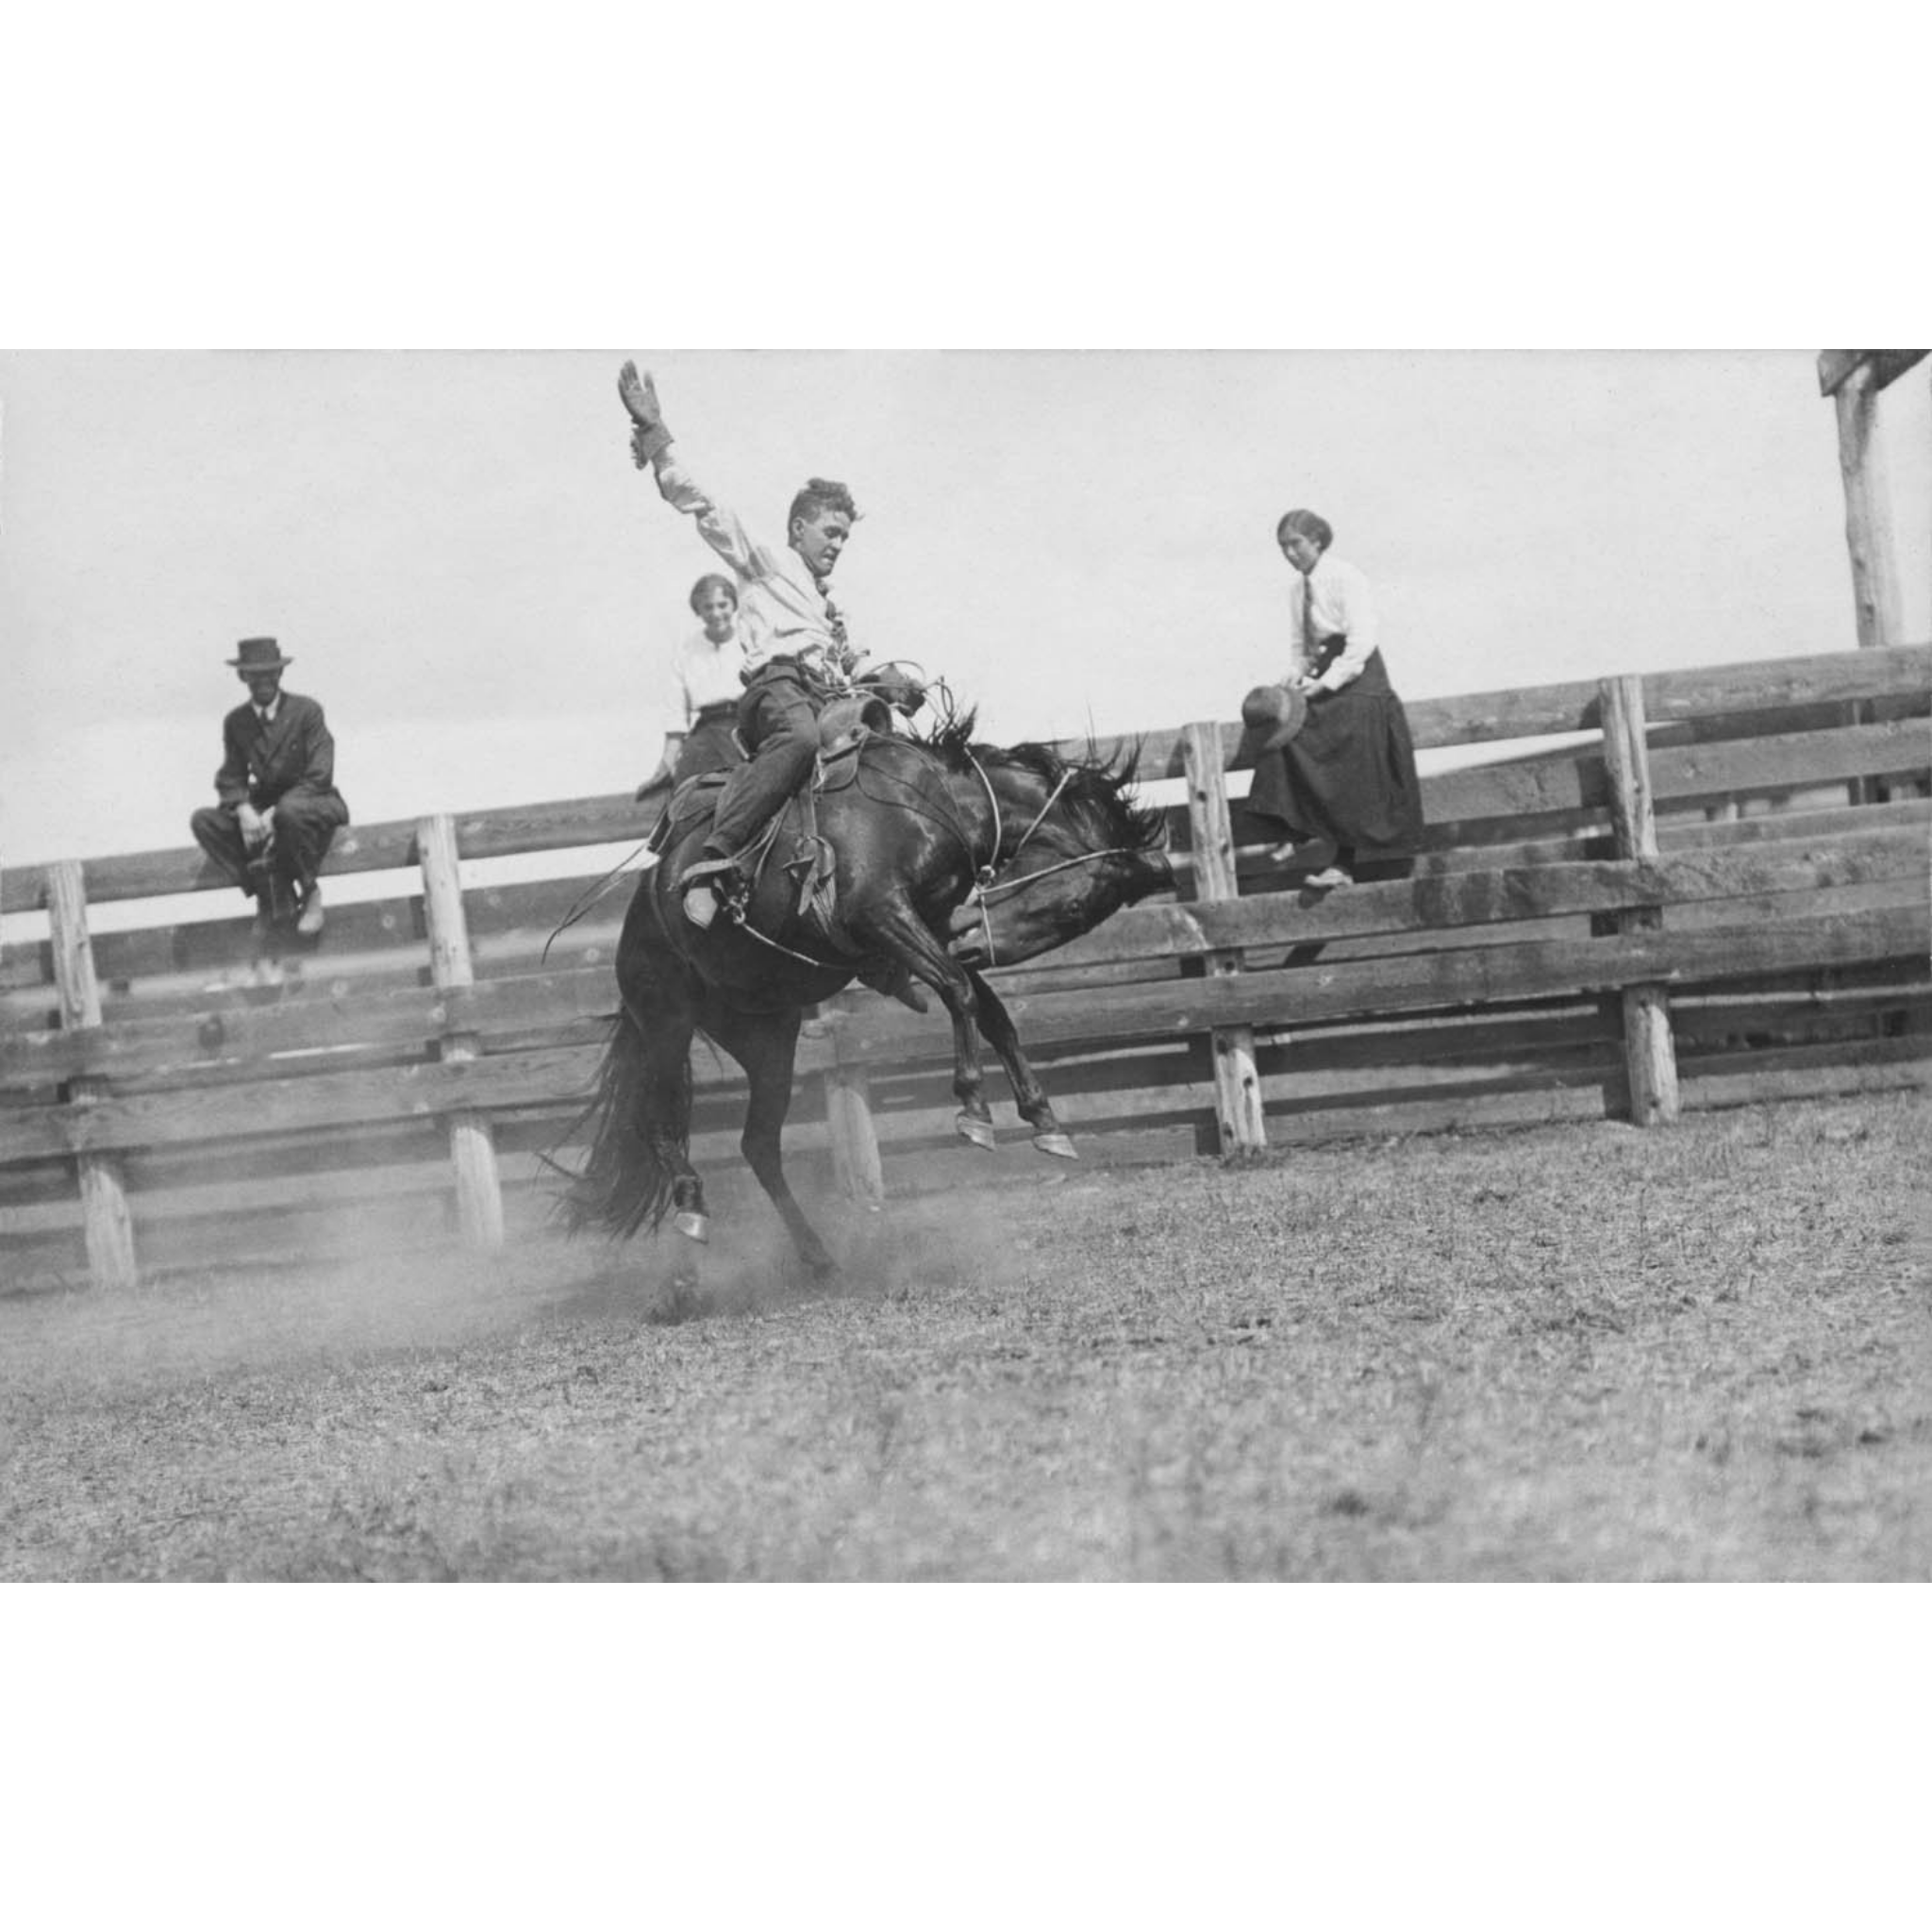 Rodeo Cowboys 6 - In Ranch Corral - ca. 1916 Photograph